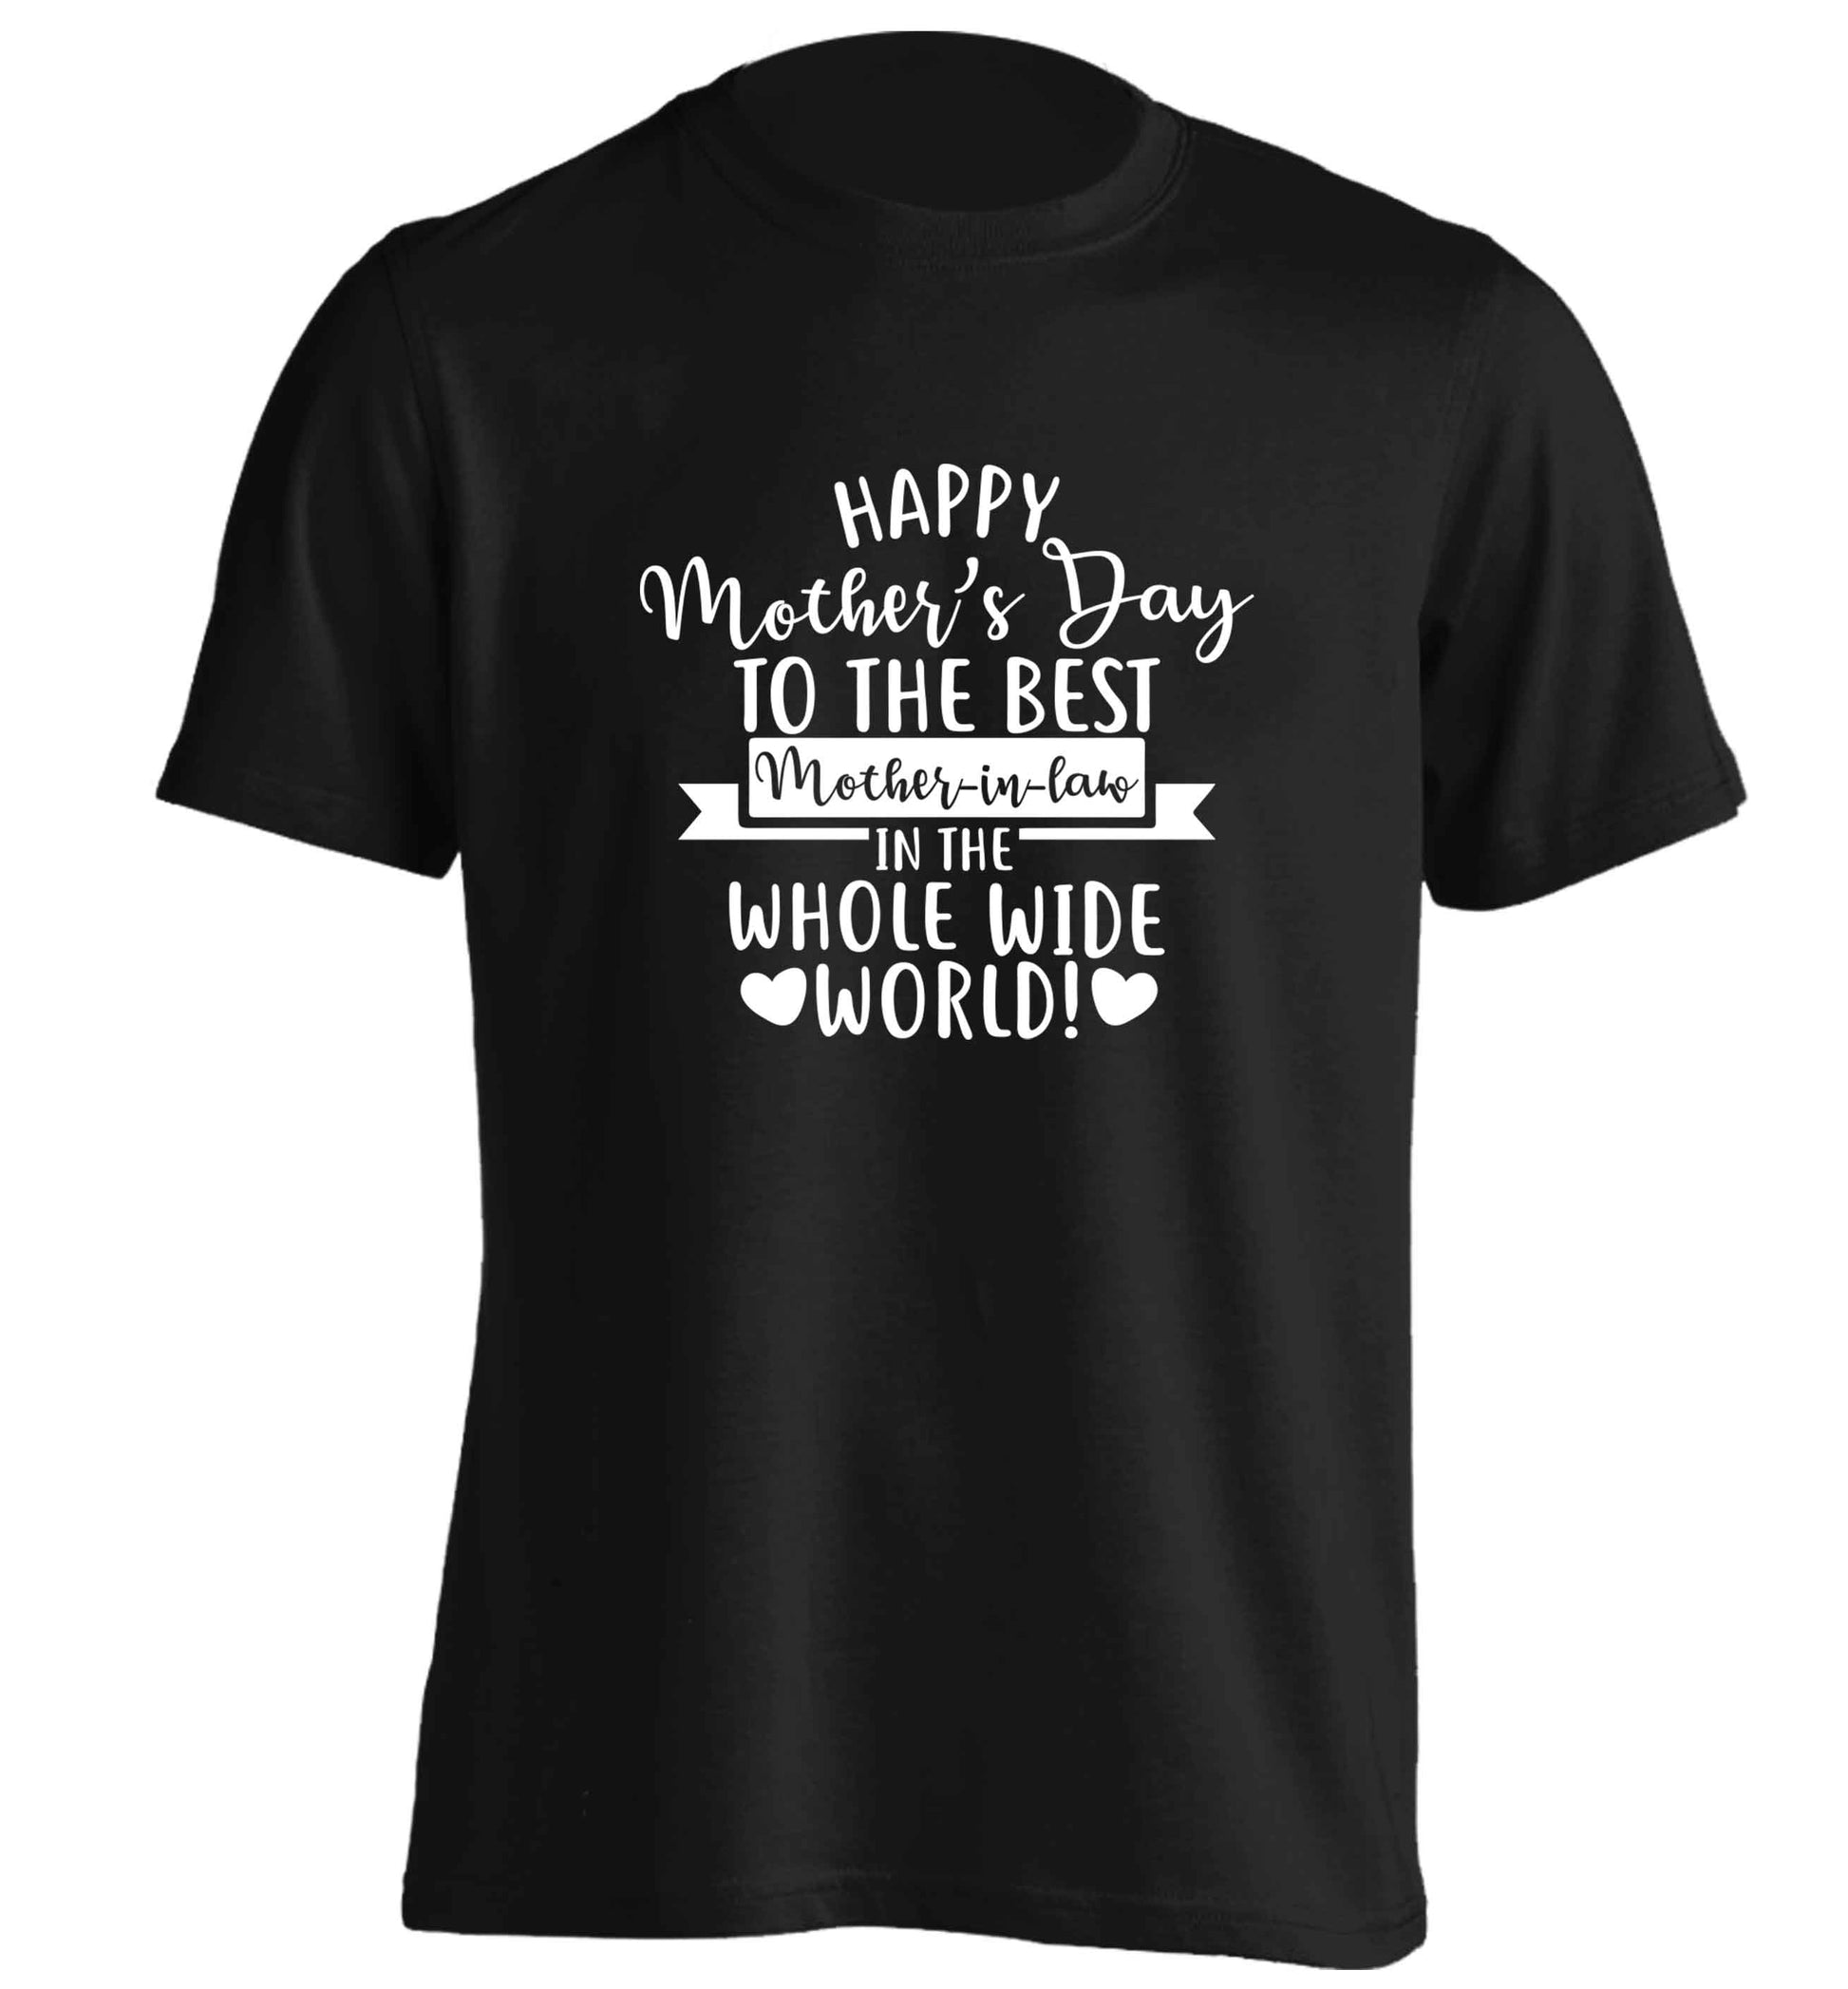 Happy mother's day to the best mother-in law in the world adults unisex black Tshirt 2XL